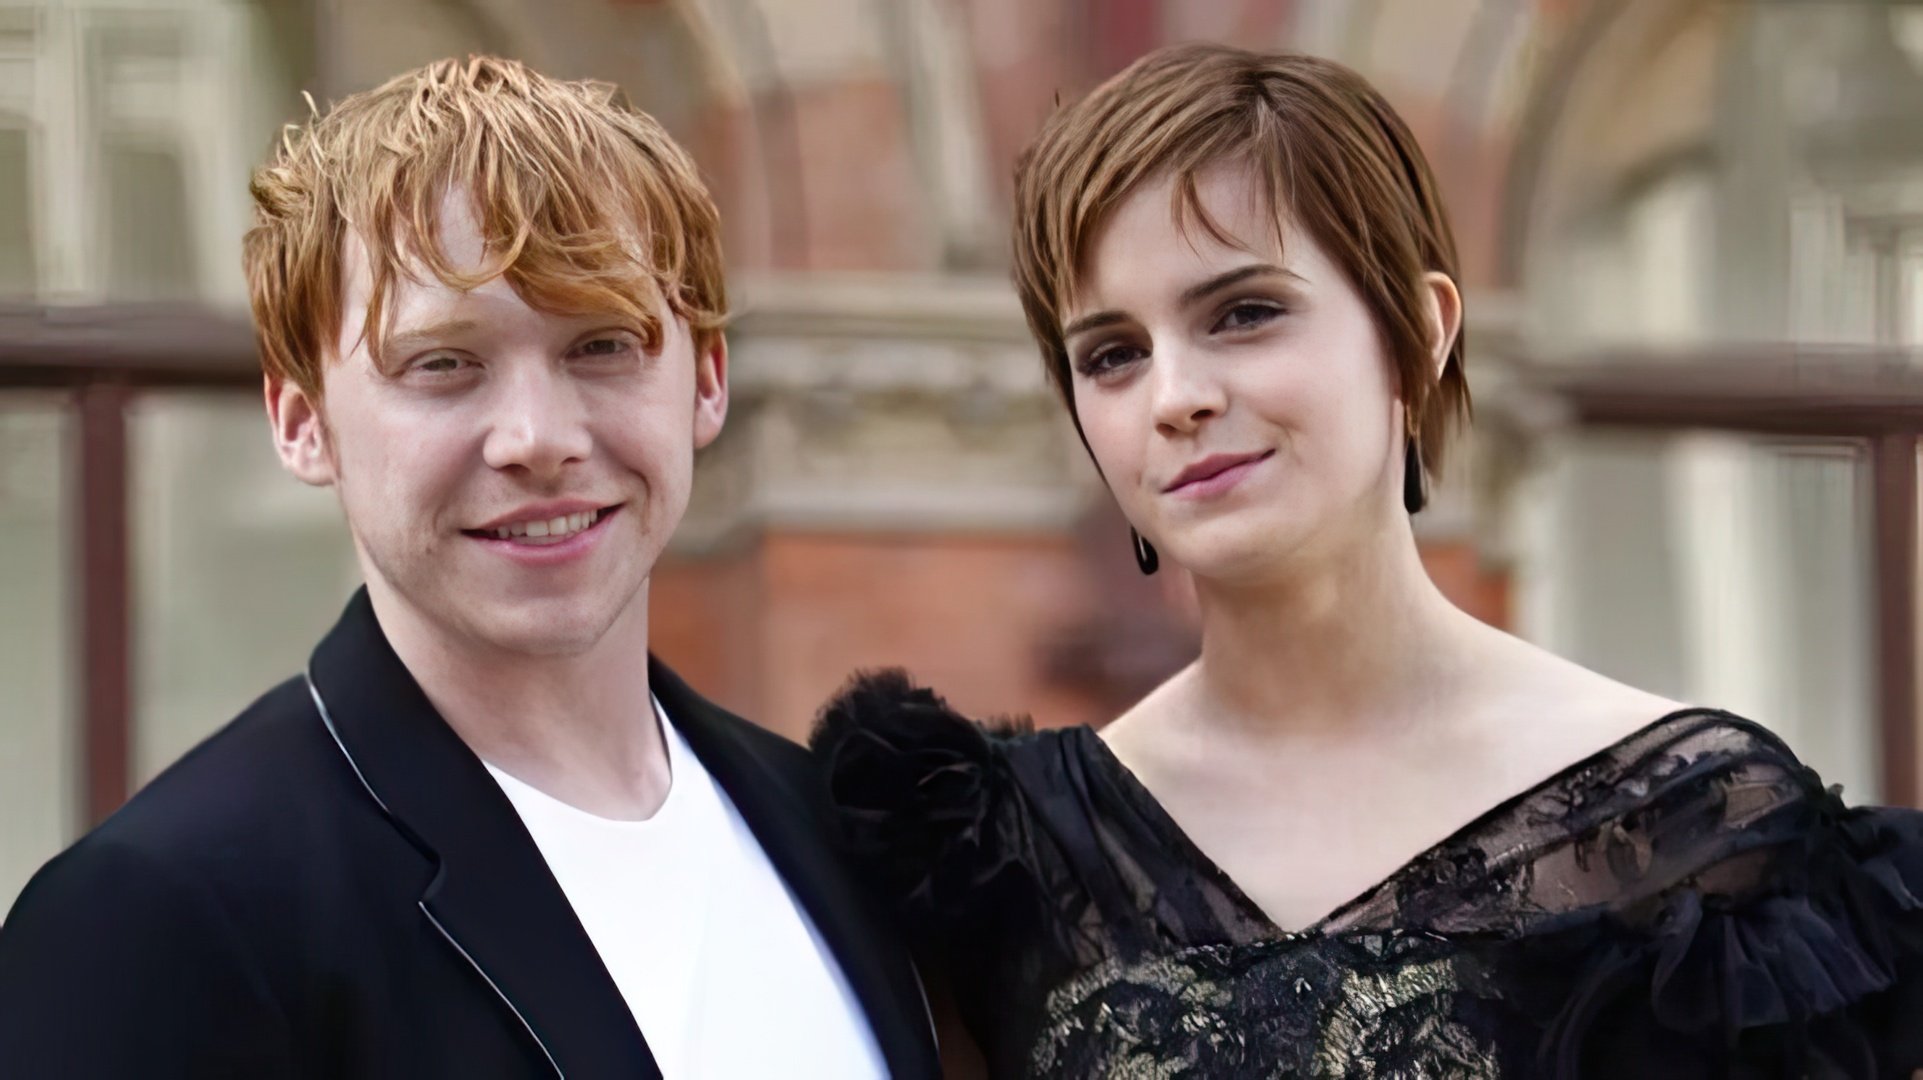 There was nothing romantic between Rupert Grint and Emma Watson